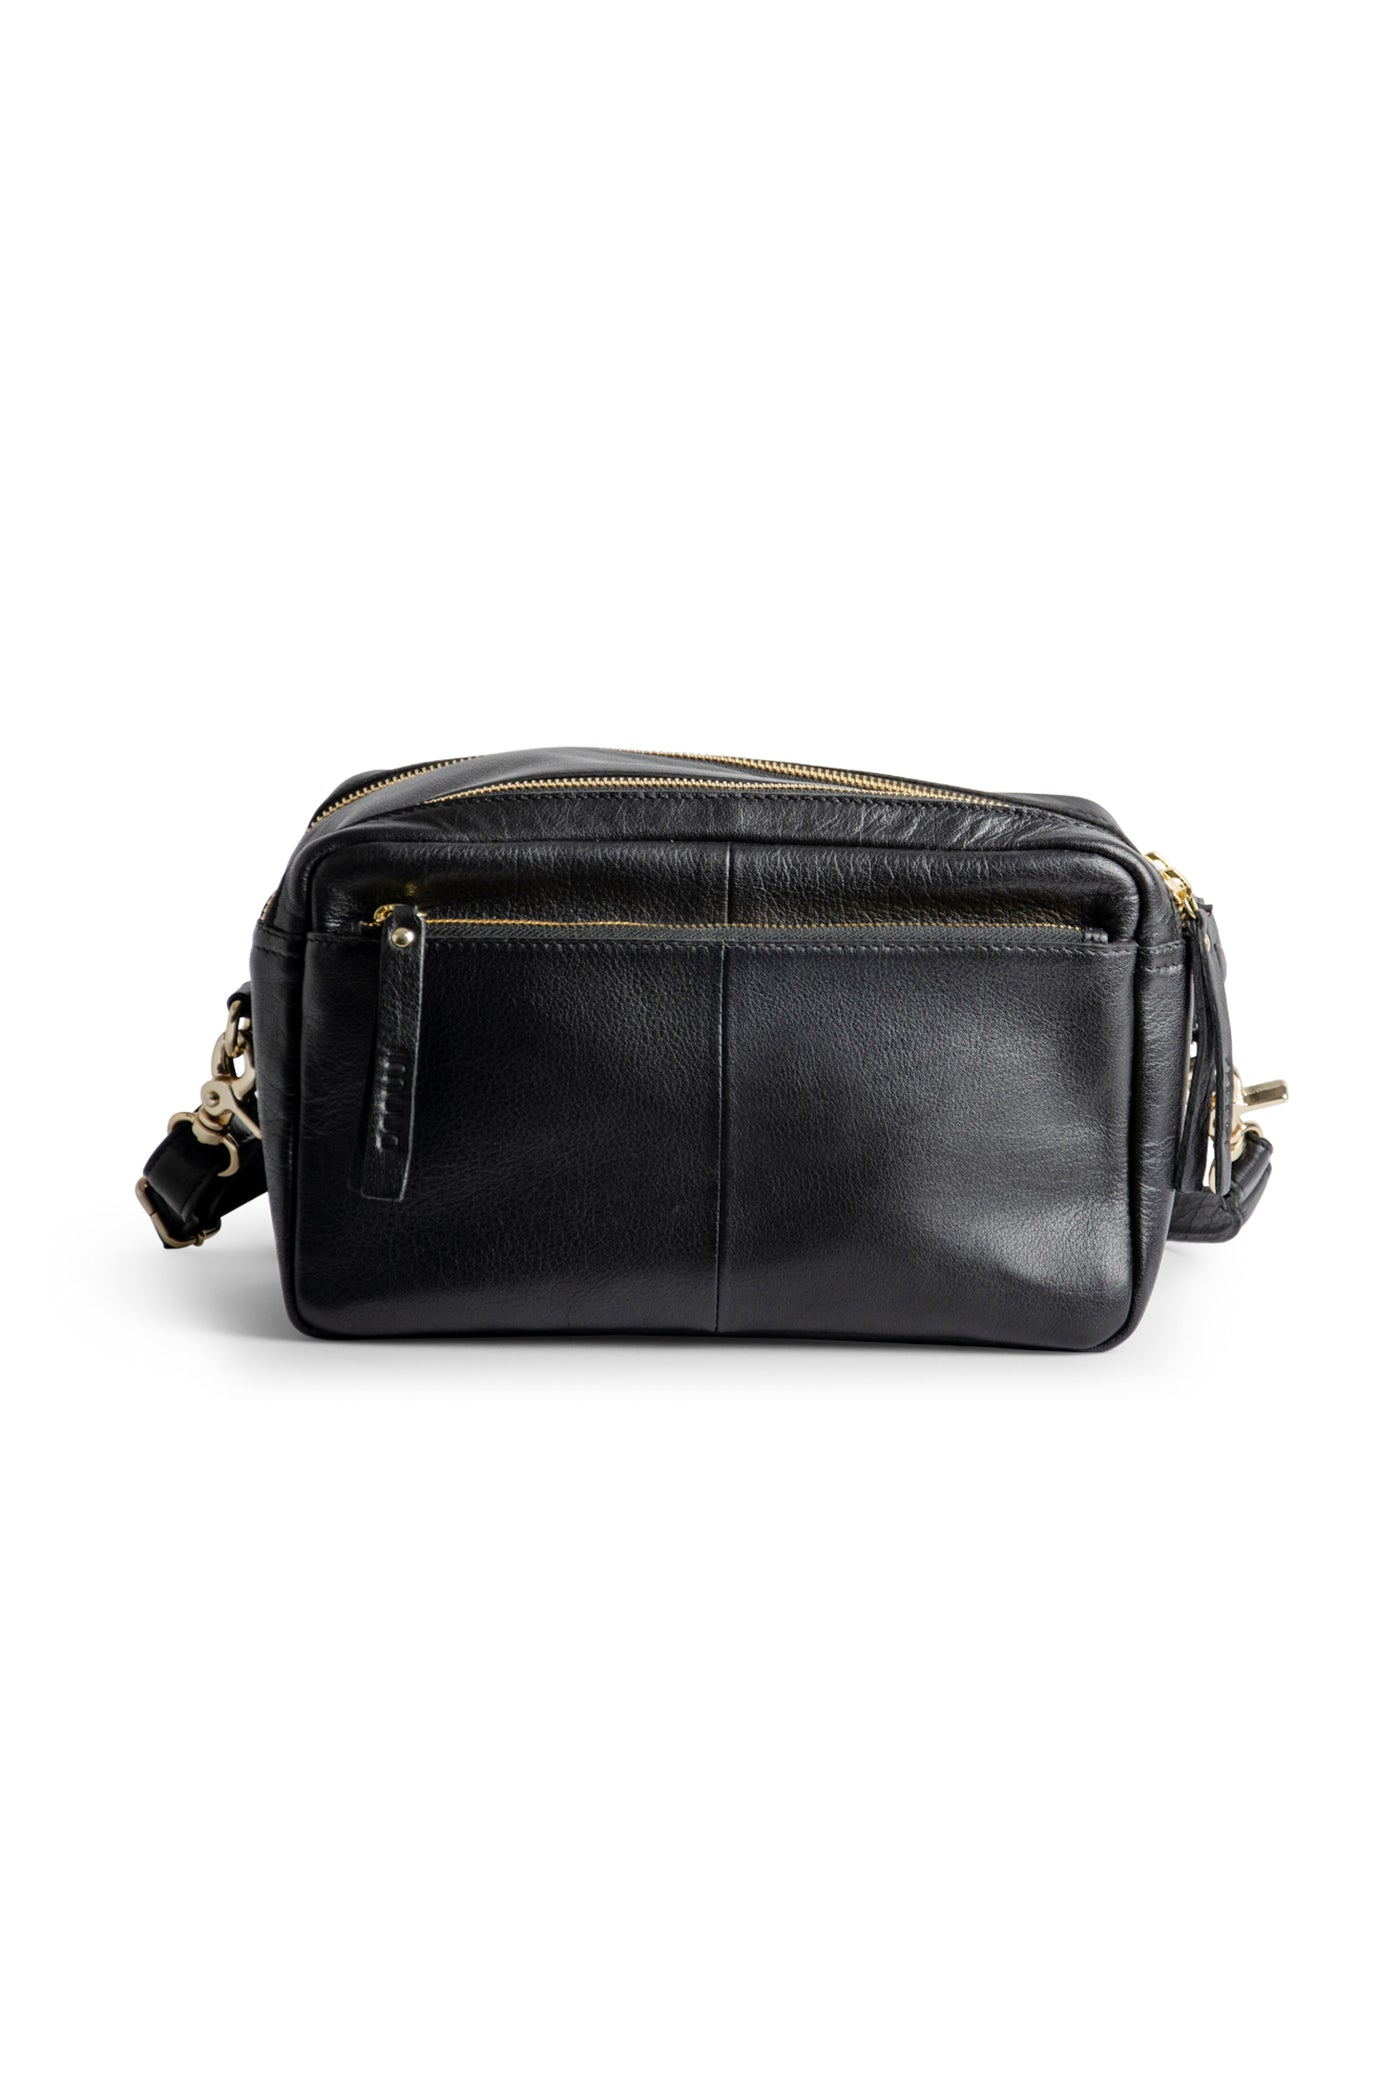 muud Stavanger - Limited edition Project Bag Limited Black